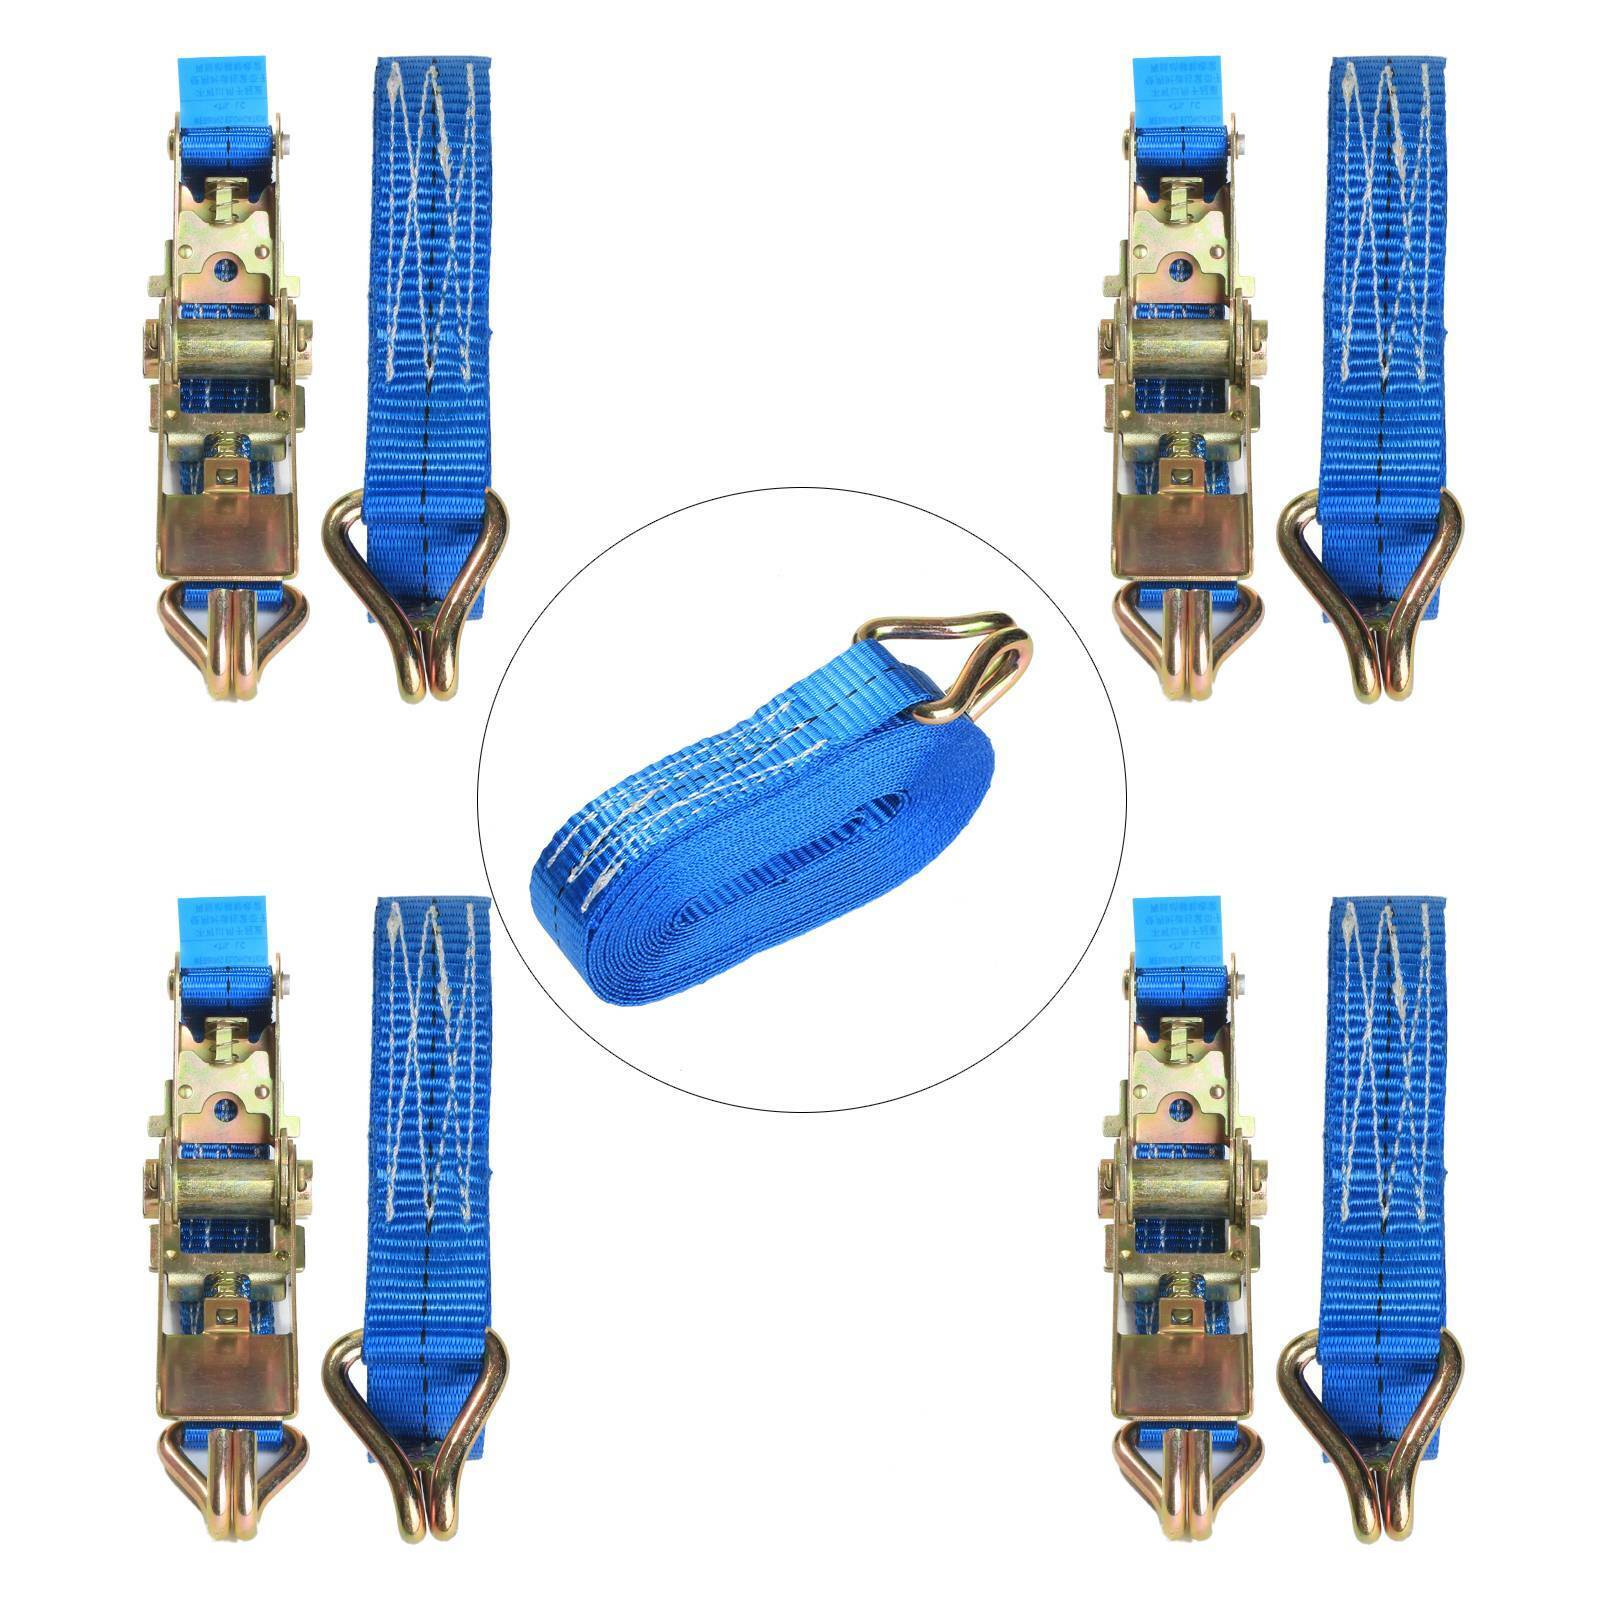 4 x 25mm 5 Meters Ratchet Tie Down Straps 800KG Claws Lorry Lashing Handy Travel